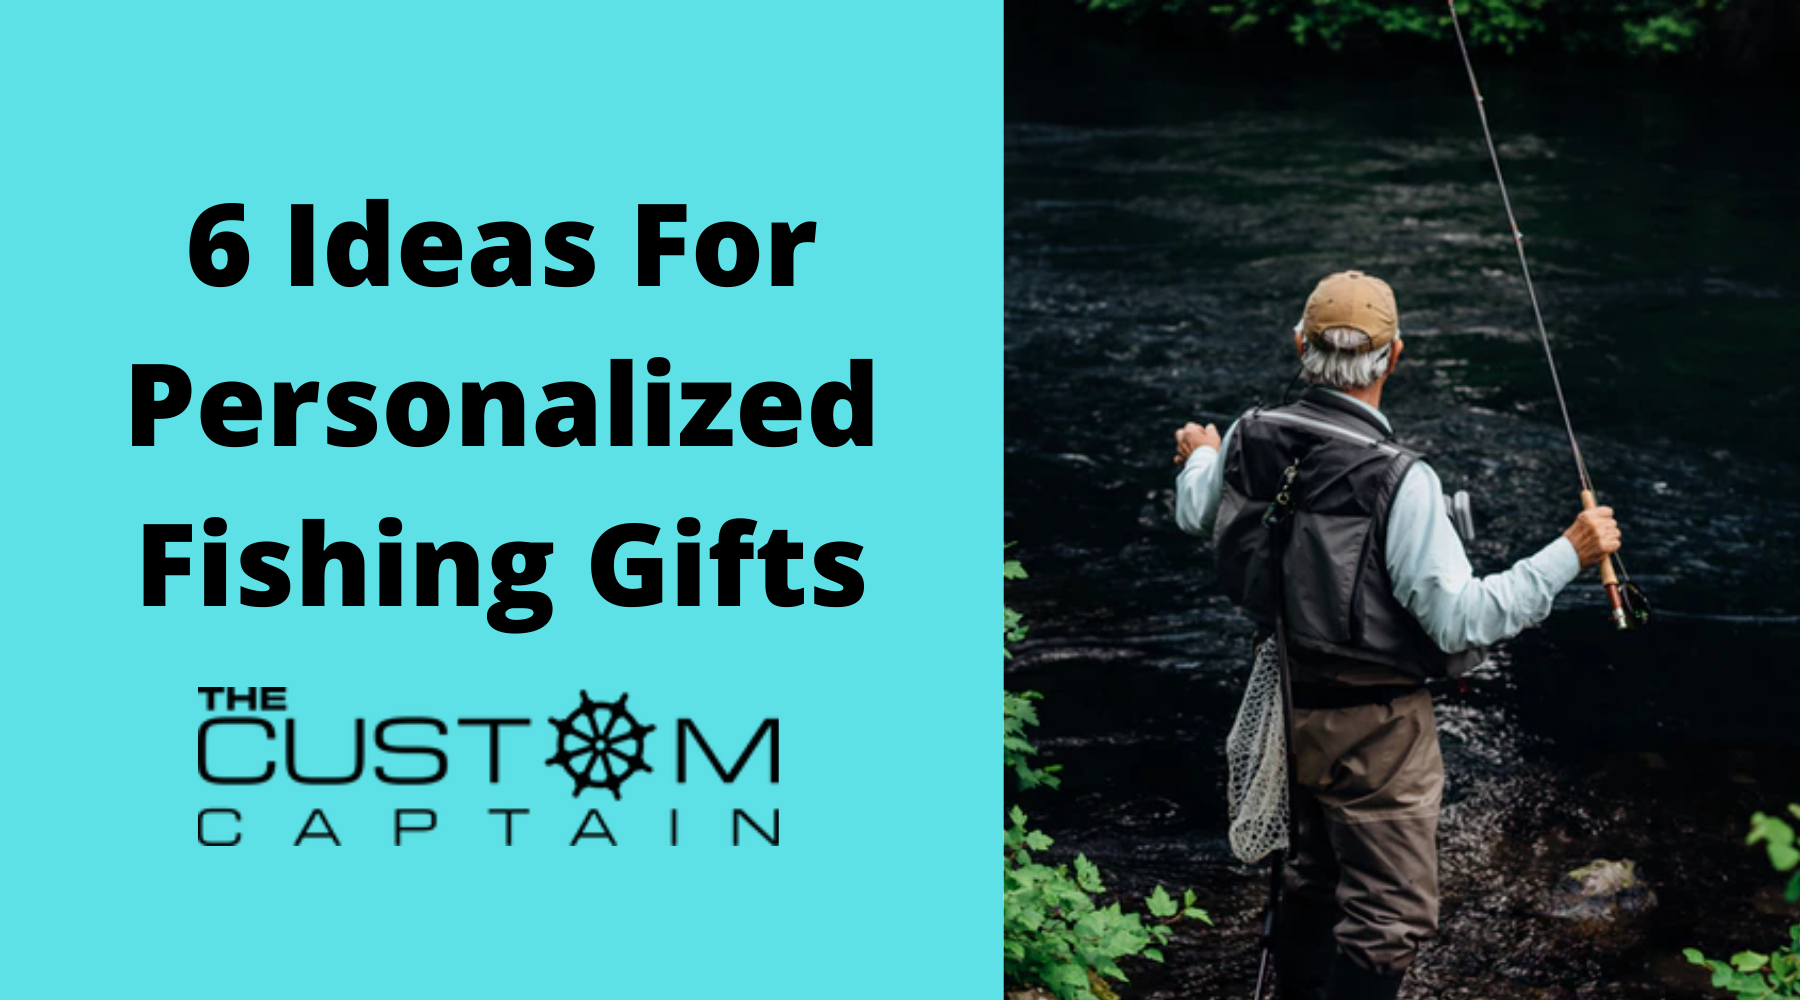 6 Ideas For Personalized Fishing Gifts